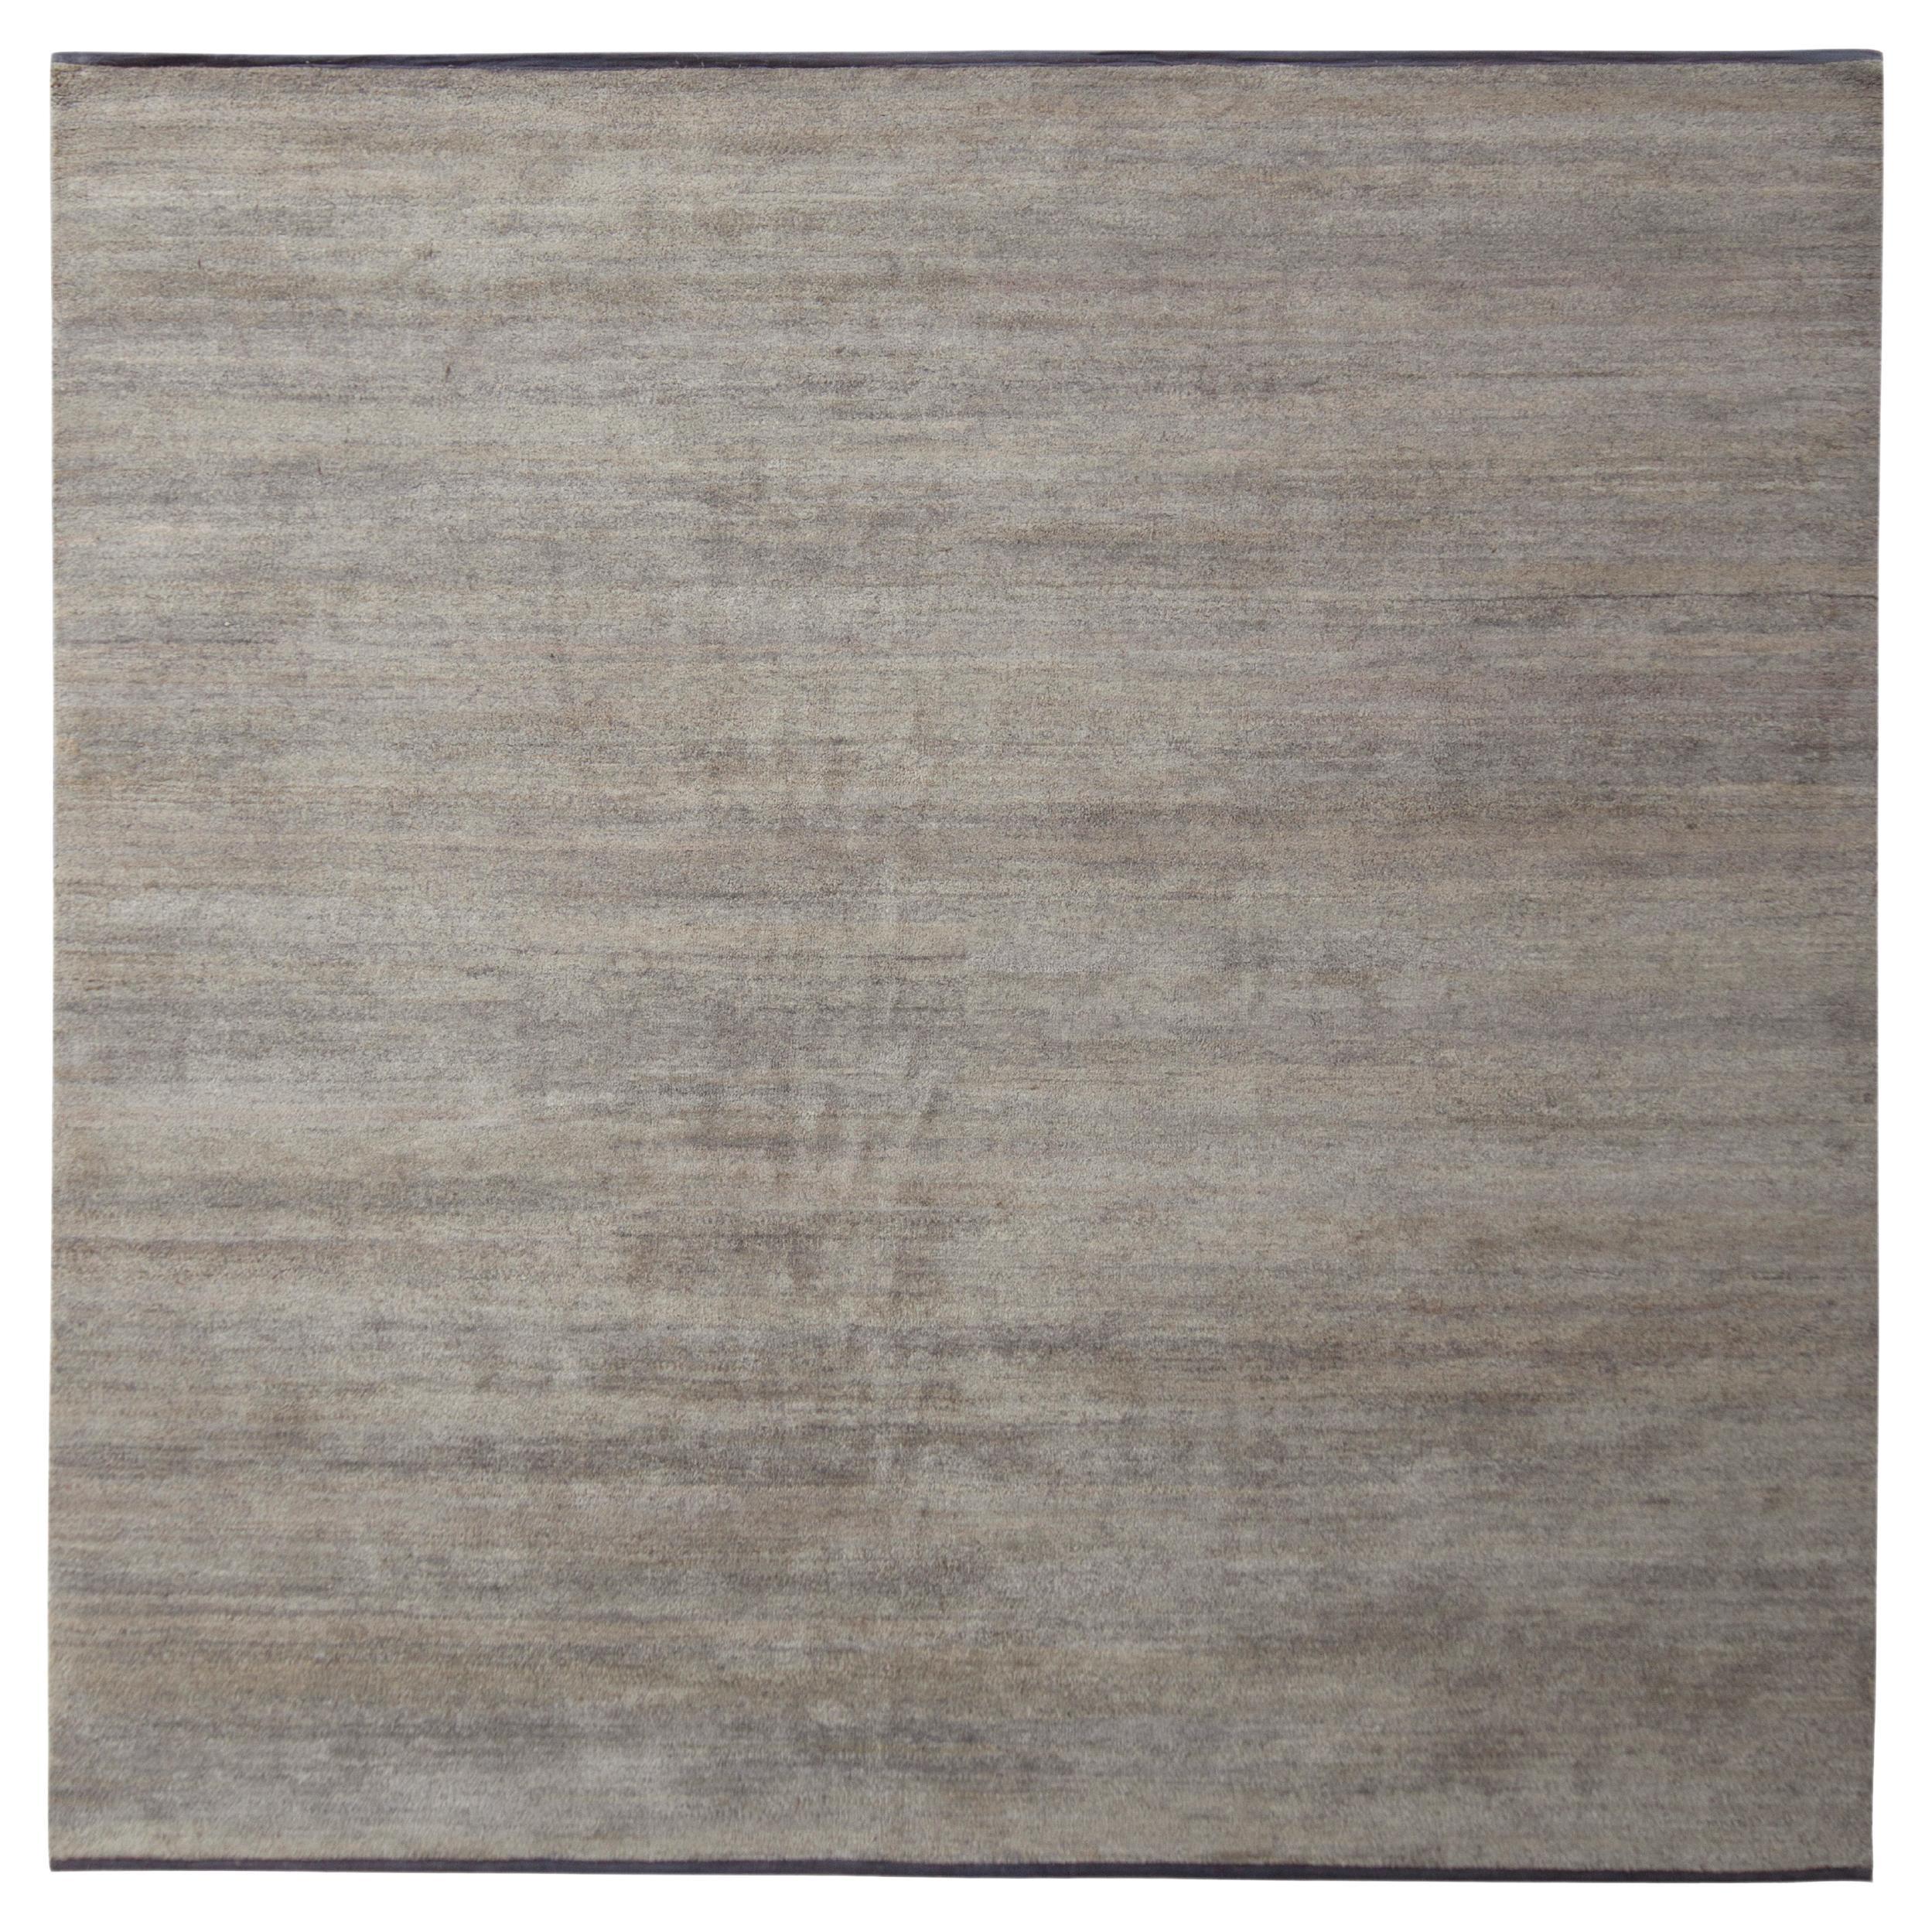 Rug & Kilim's Hand-Knotted Solid Modern Square Rug, Gray-Silver Two-Tone Silk